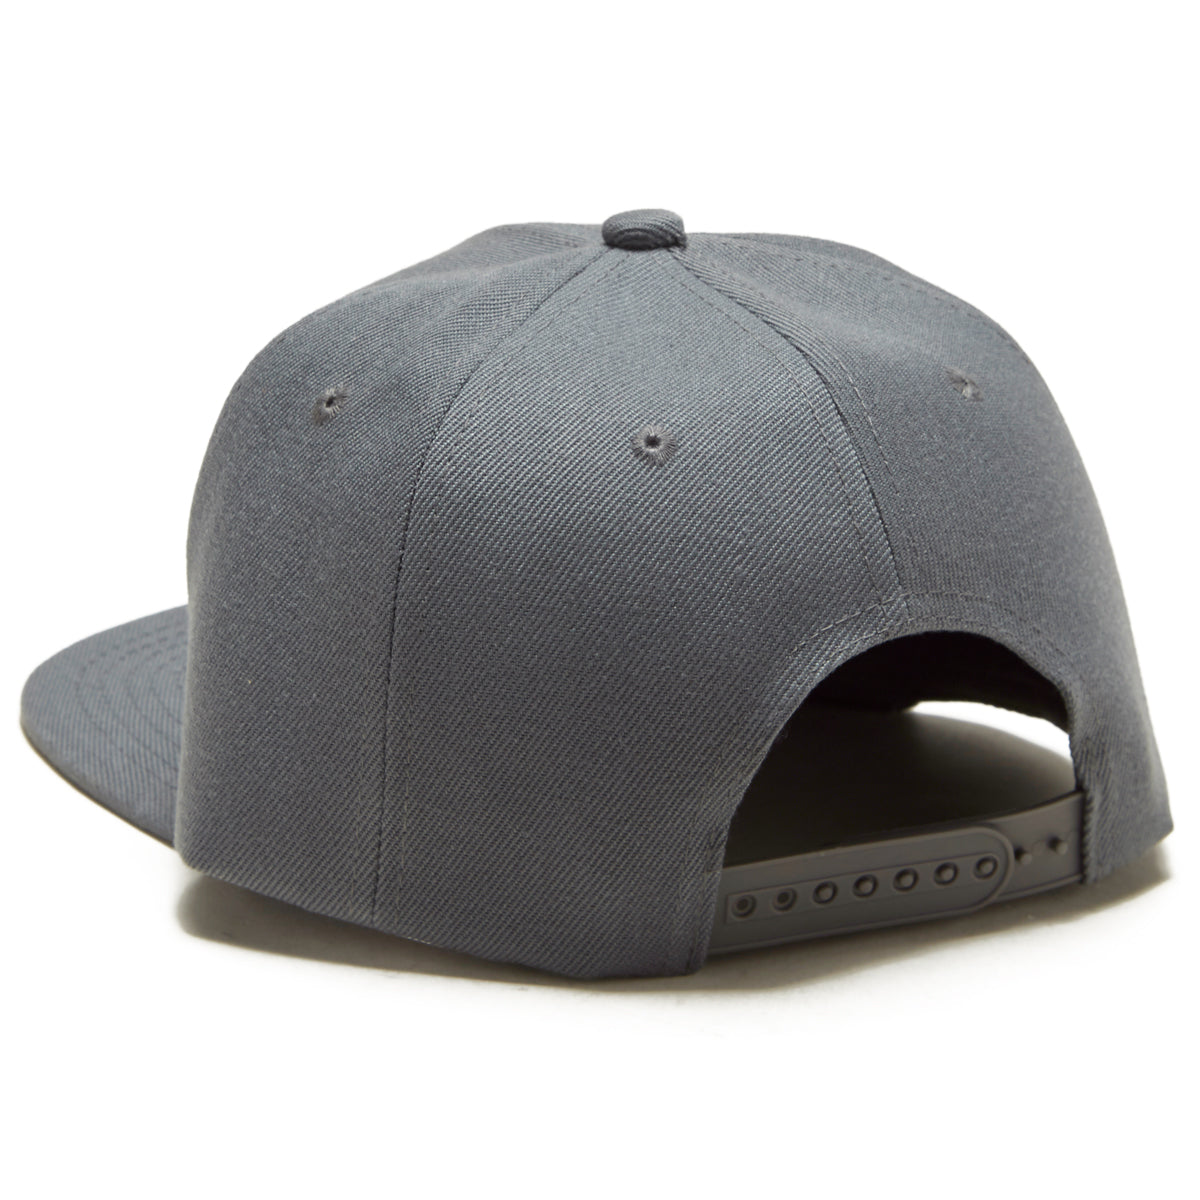 Dogtown Blue Cross Patch Snapback Hat - Charcoal Grey image 2